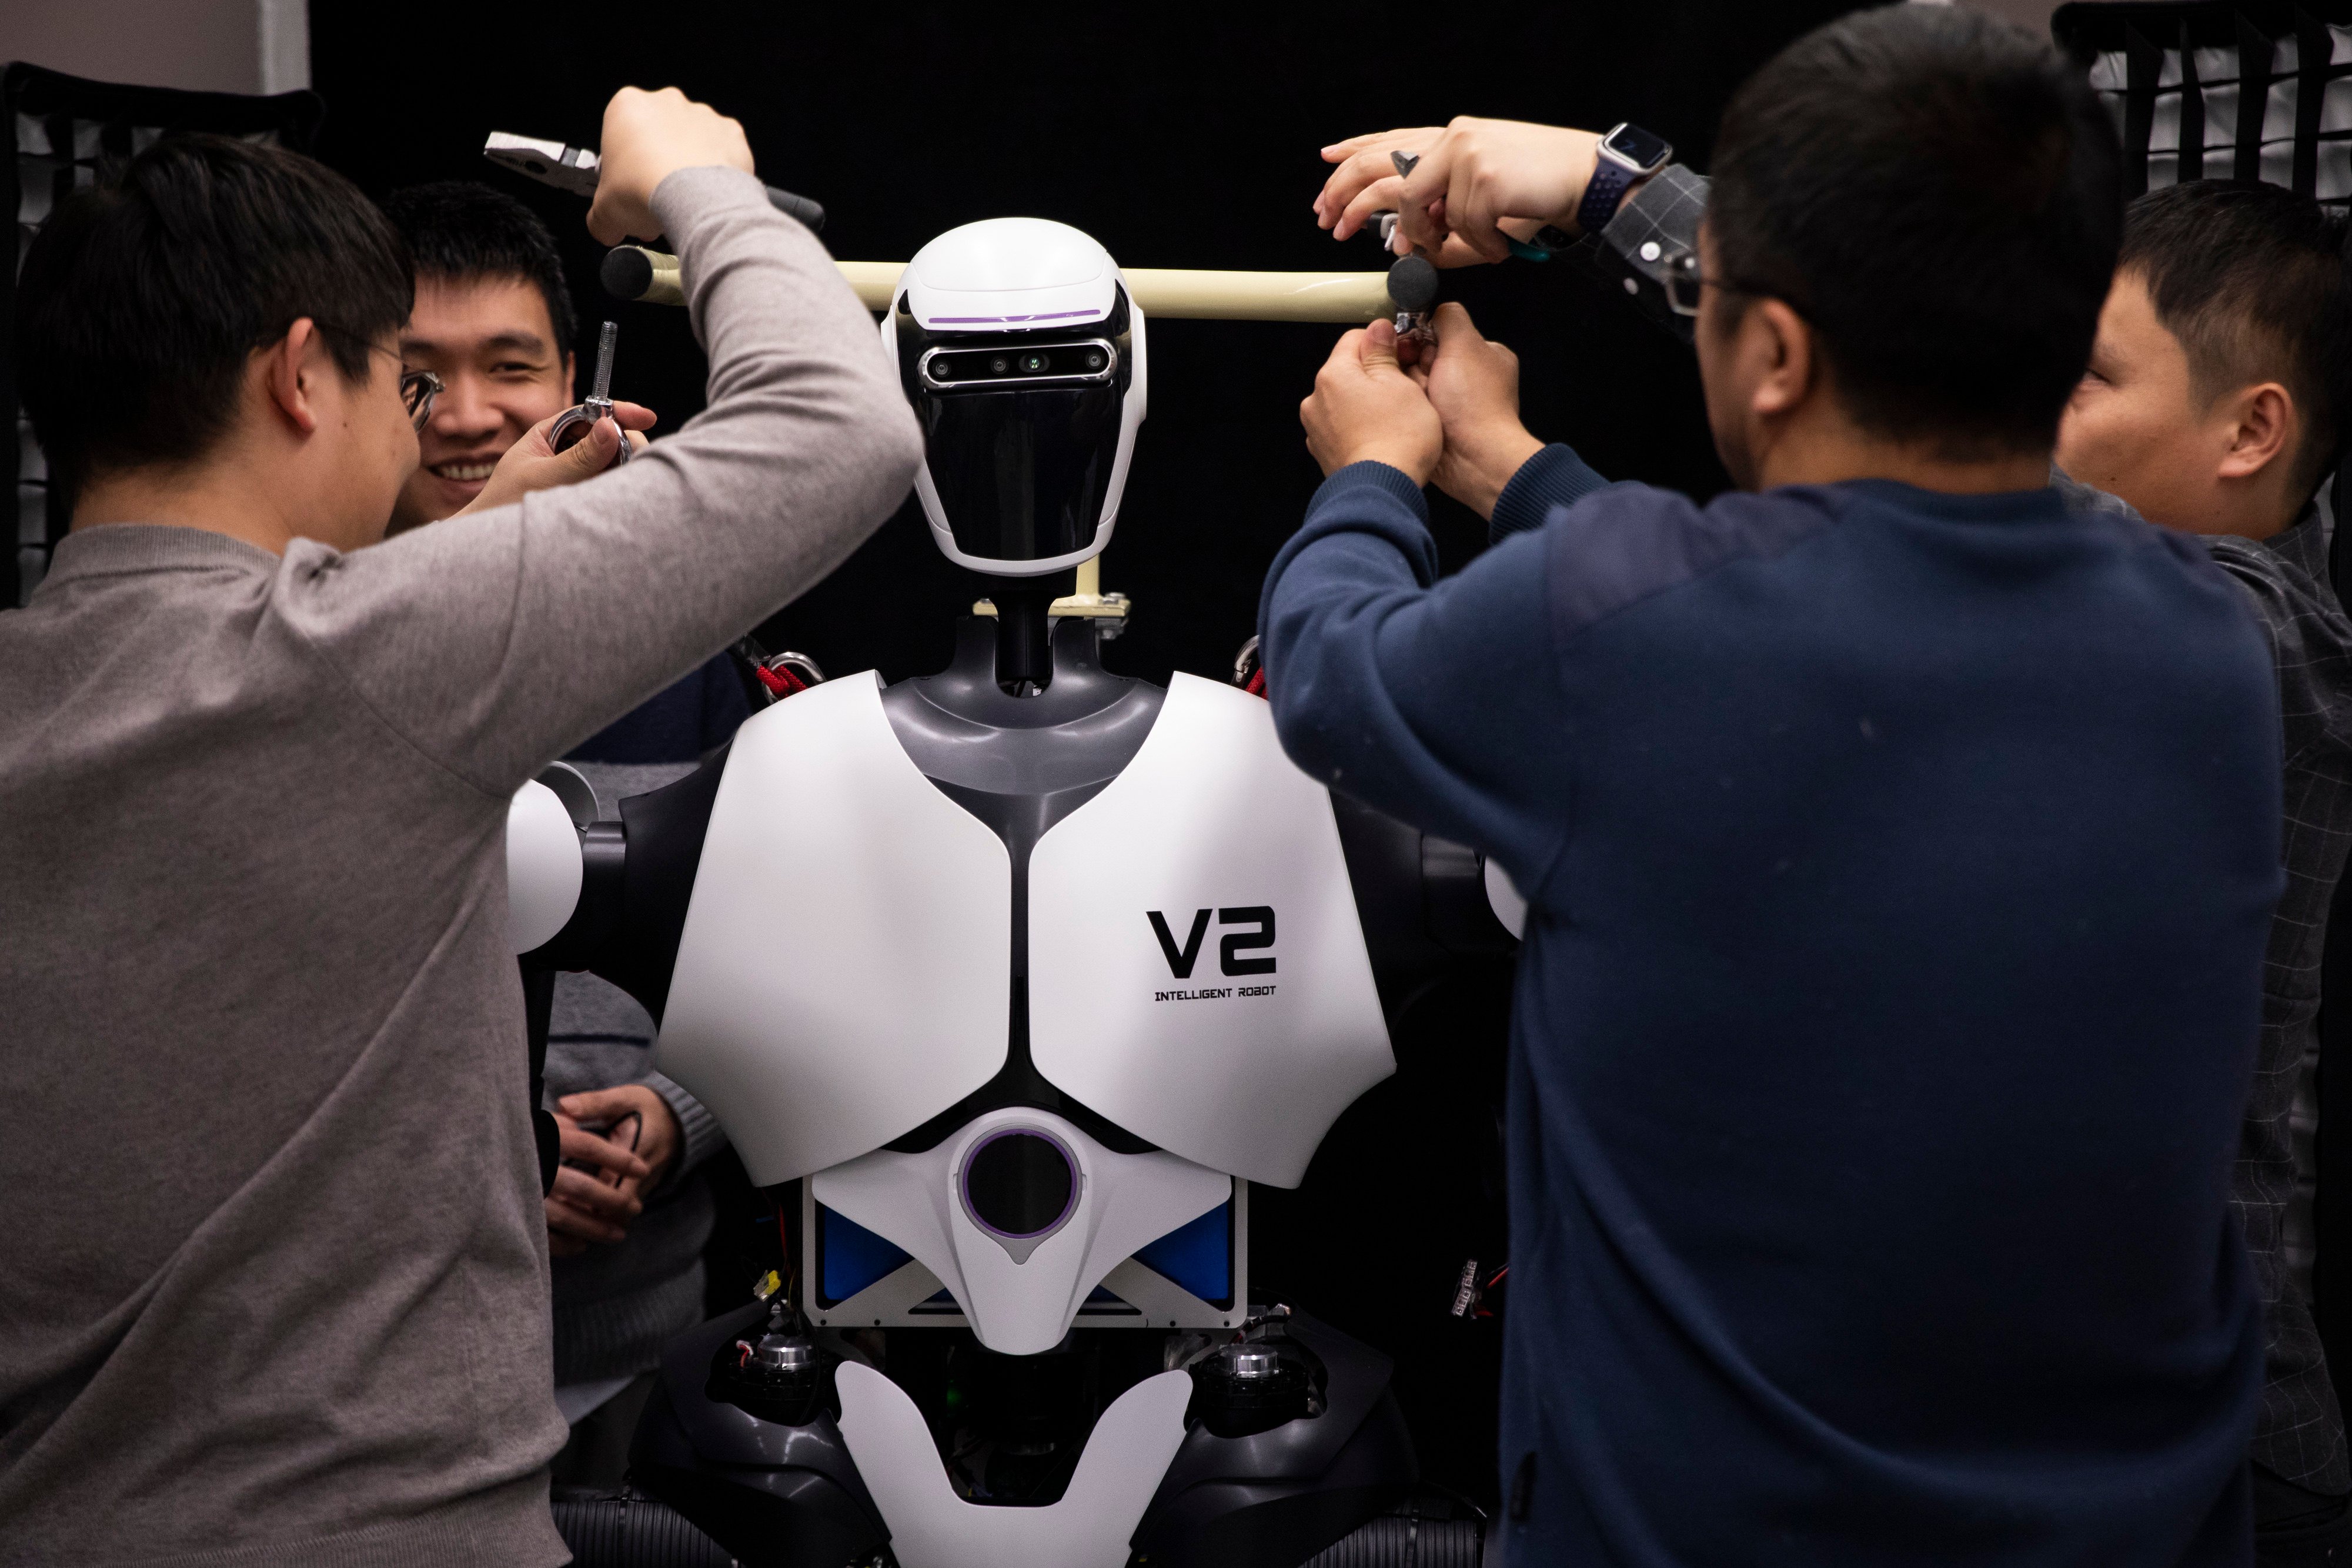 The Chinese government has launched a multi-pronged approach to filling its advanced tech workforce needs, including directing universities, industry and government bodies on how to recruit and keep digital talent. Photo: Xinhua